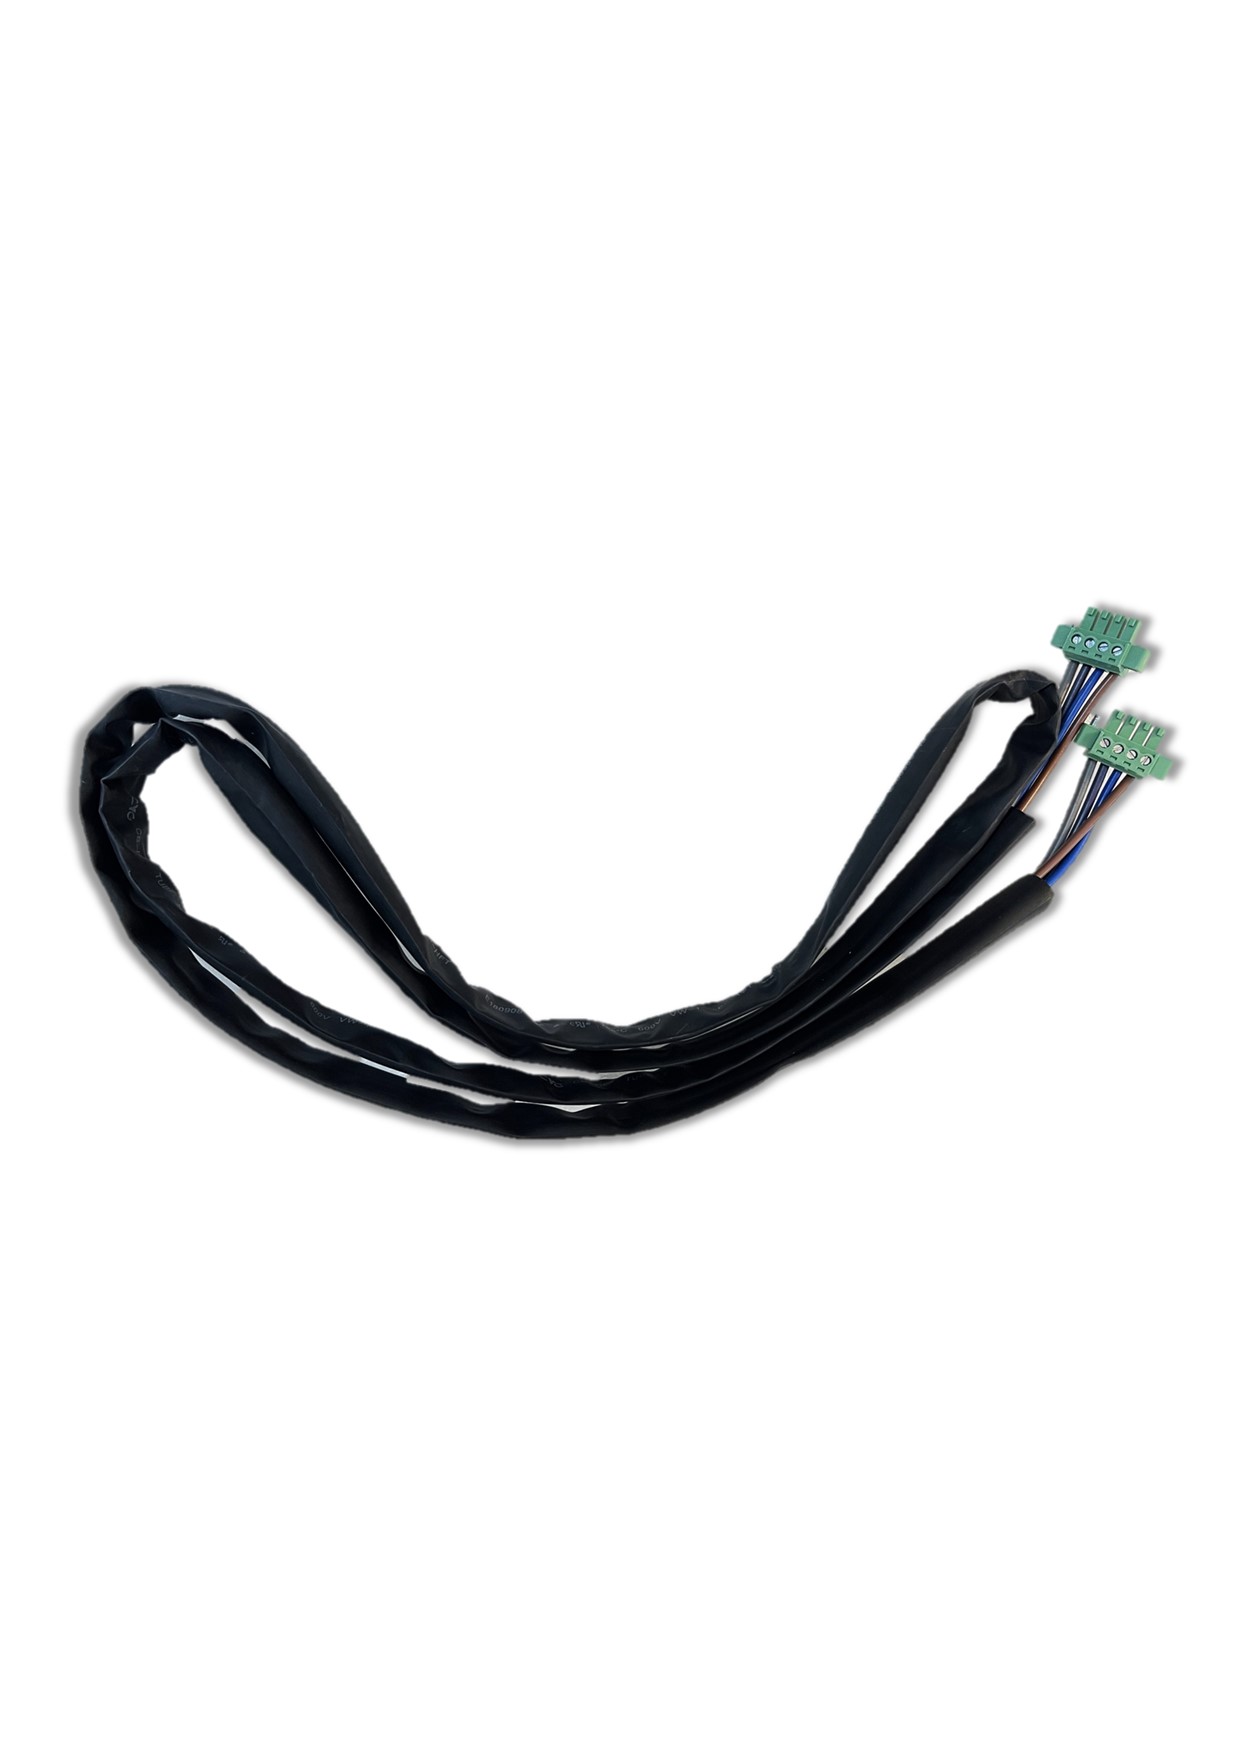 LV5048_LV6048 Current Sharing Cable